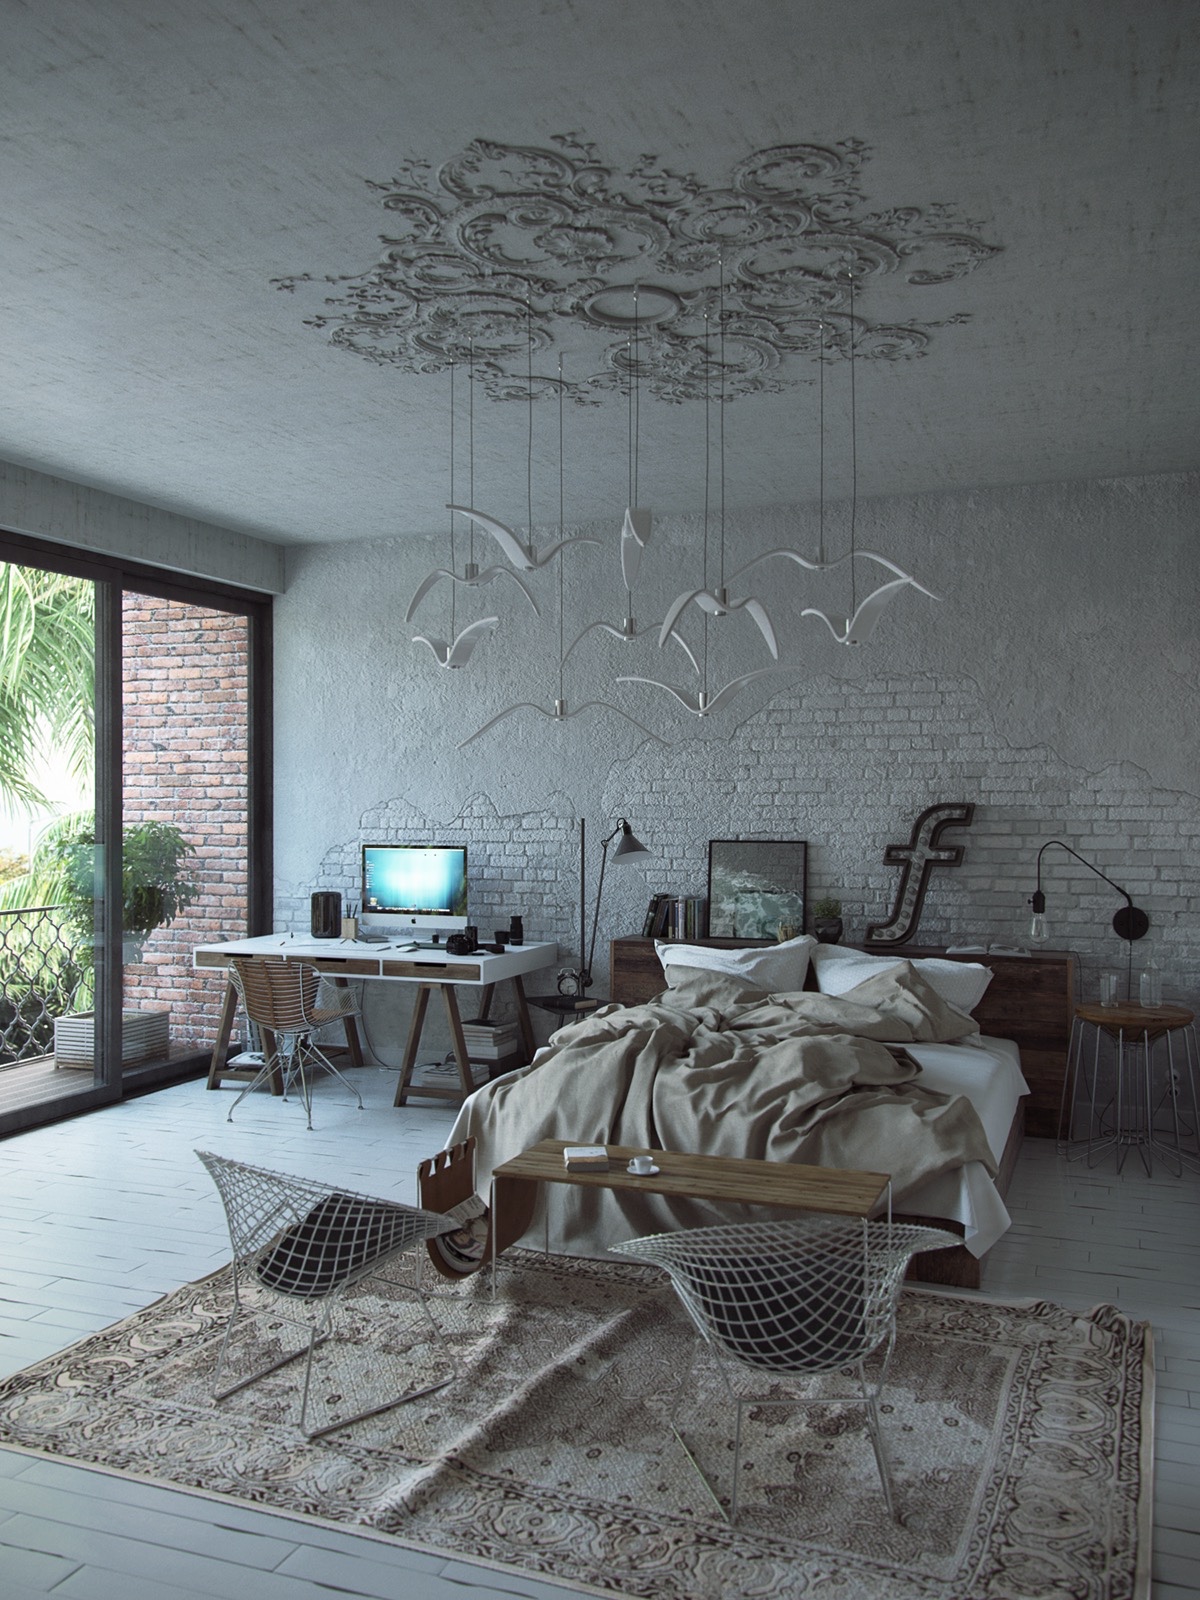 A minimalistic bedroom is a perfect place for artistic overtones. This almost-industrial room exposes brick walls and bird motifs hanging from Victorian wall patterning. Wood mesh textures and an italic ‘f’ bring modernity.